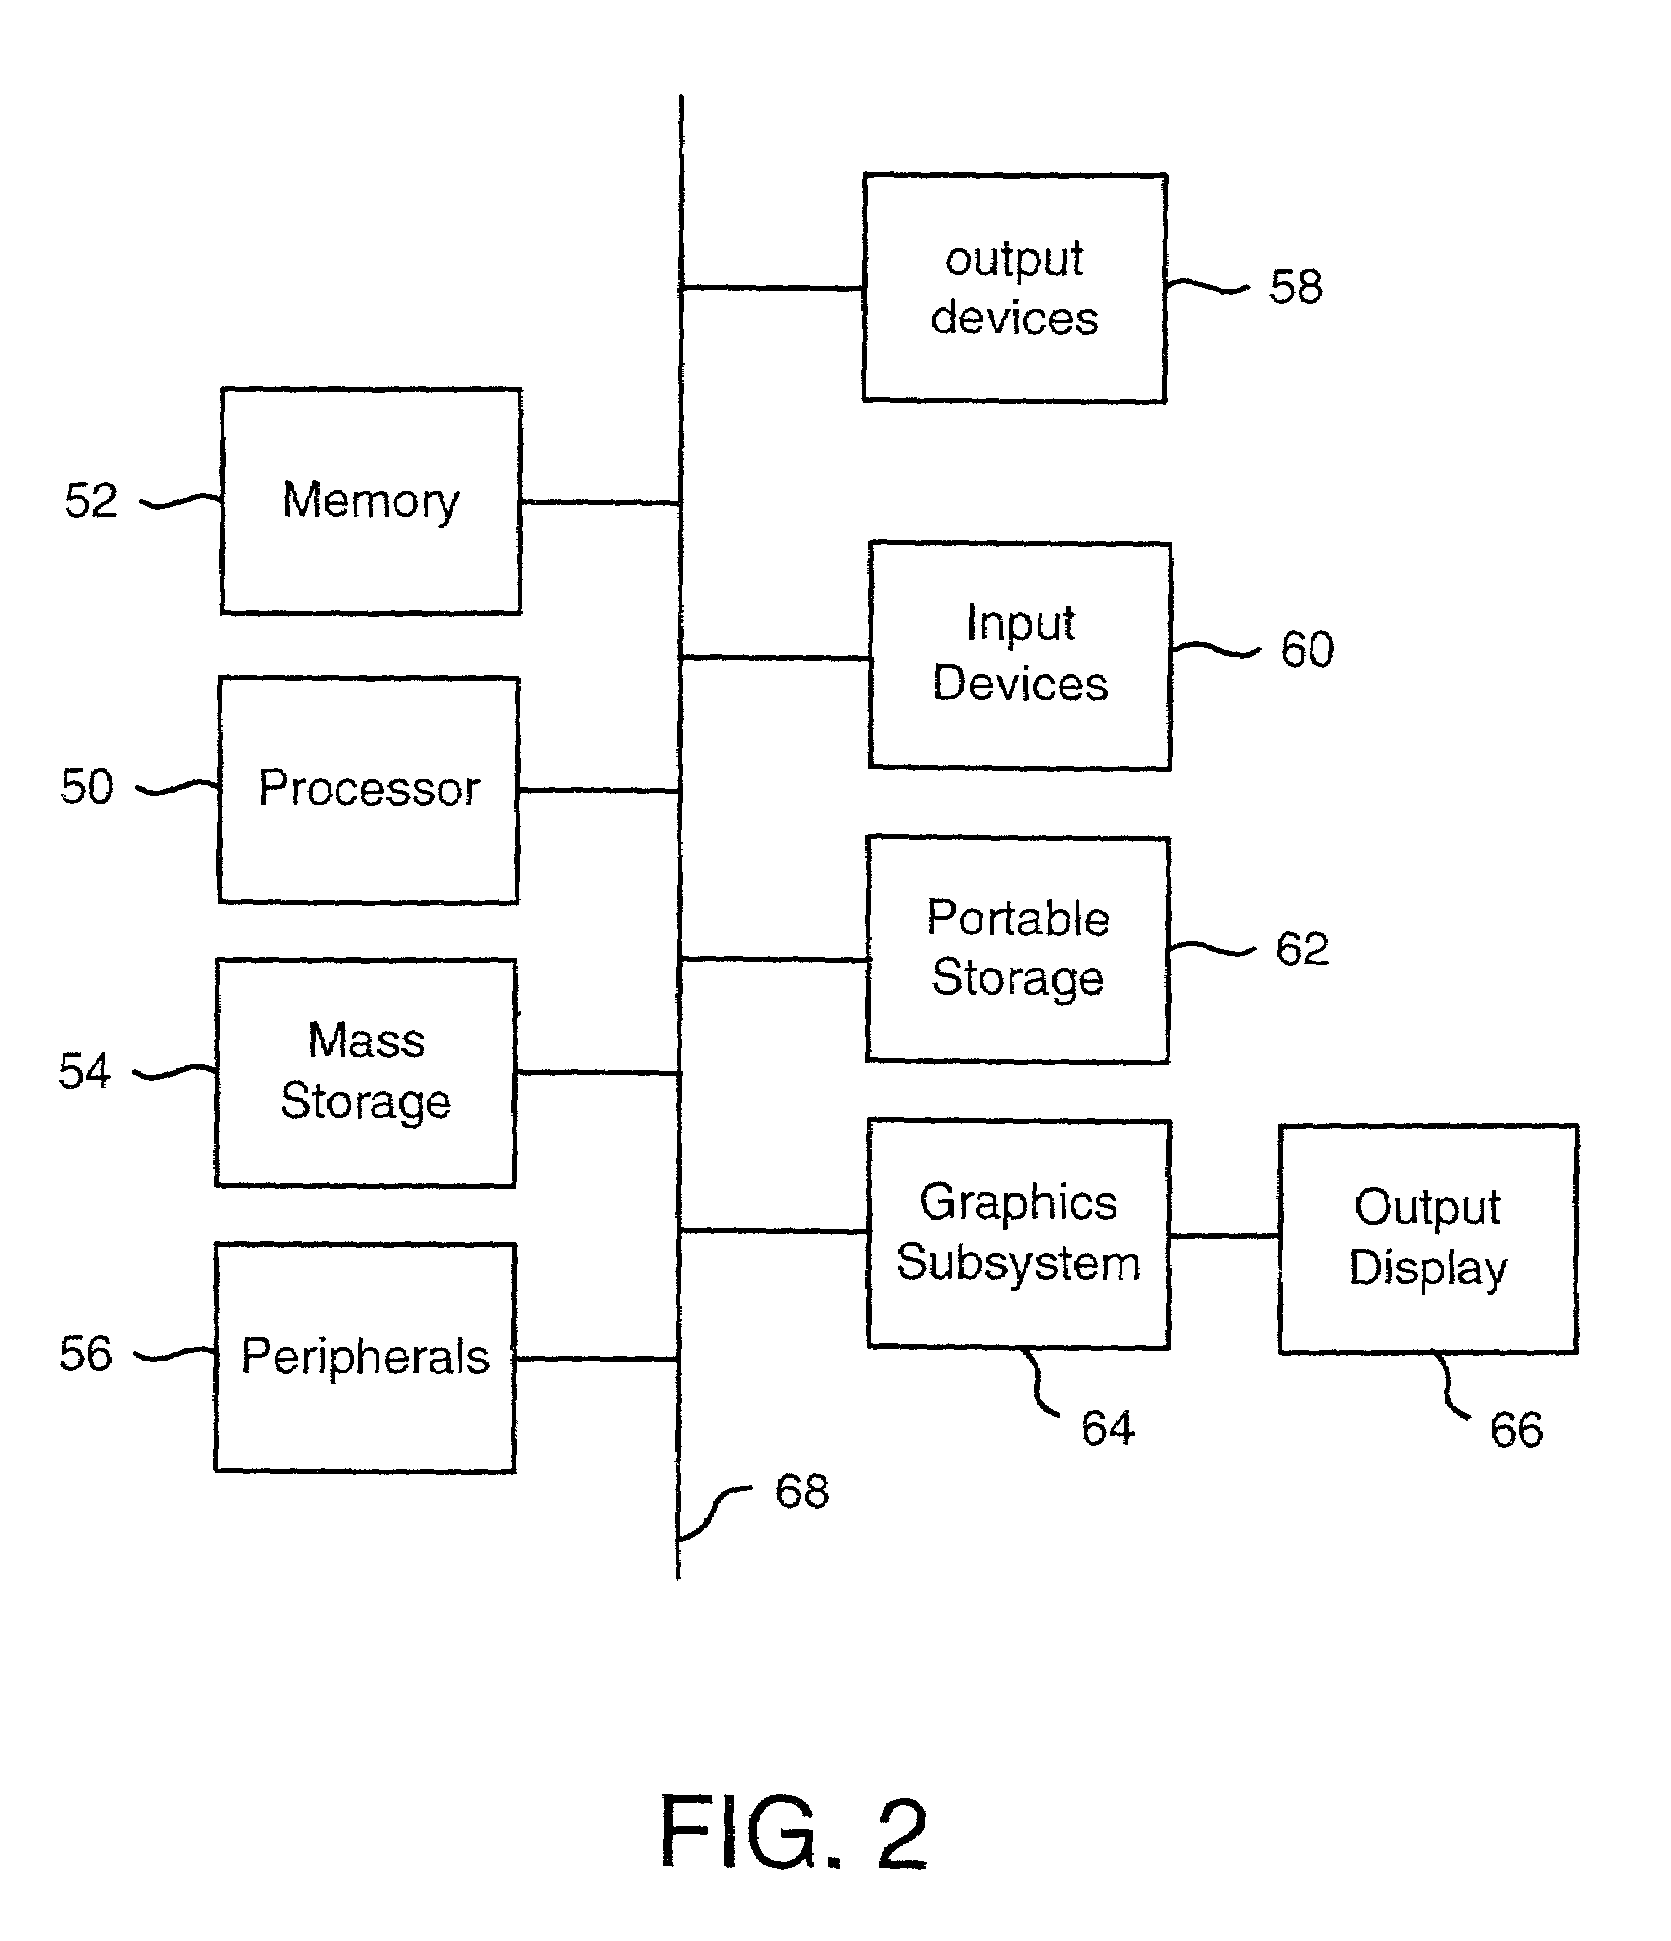 Systems and methods for testing whether access to a resource is authorized based on access information